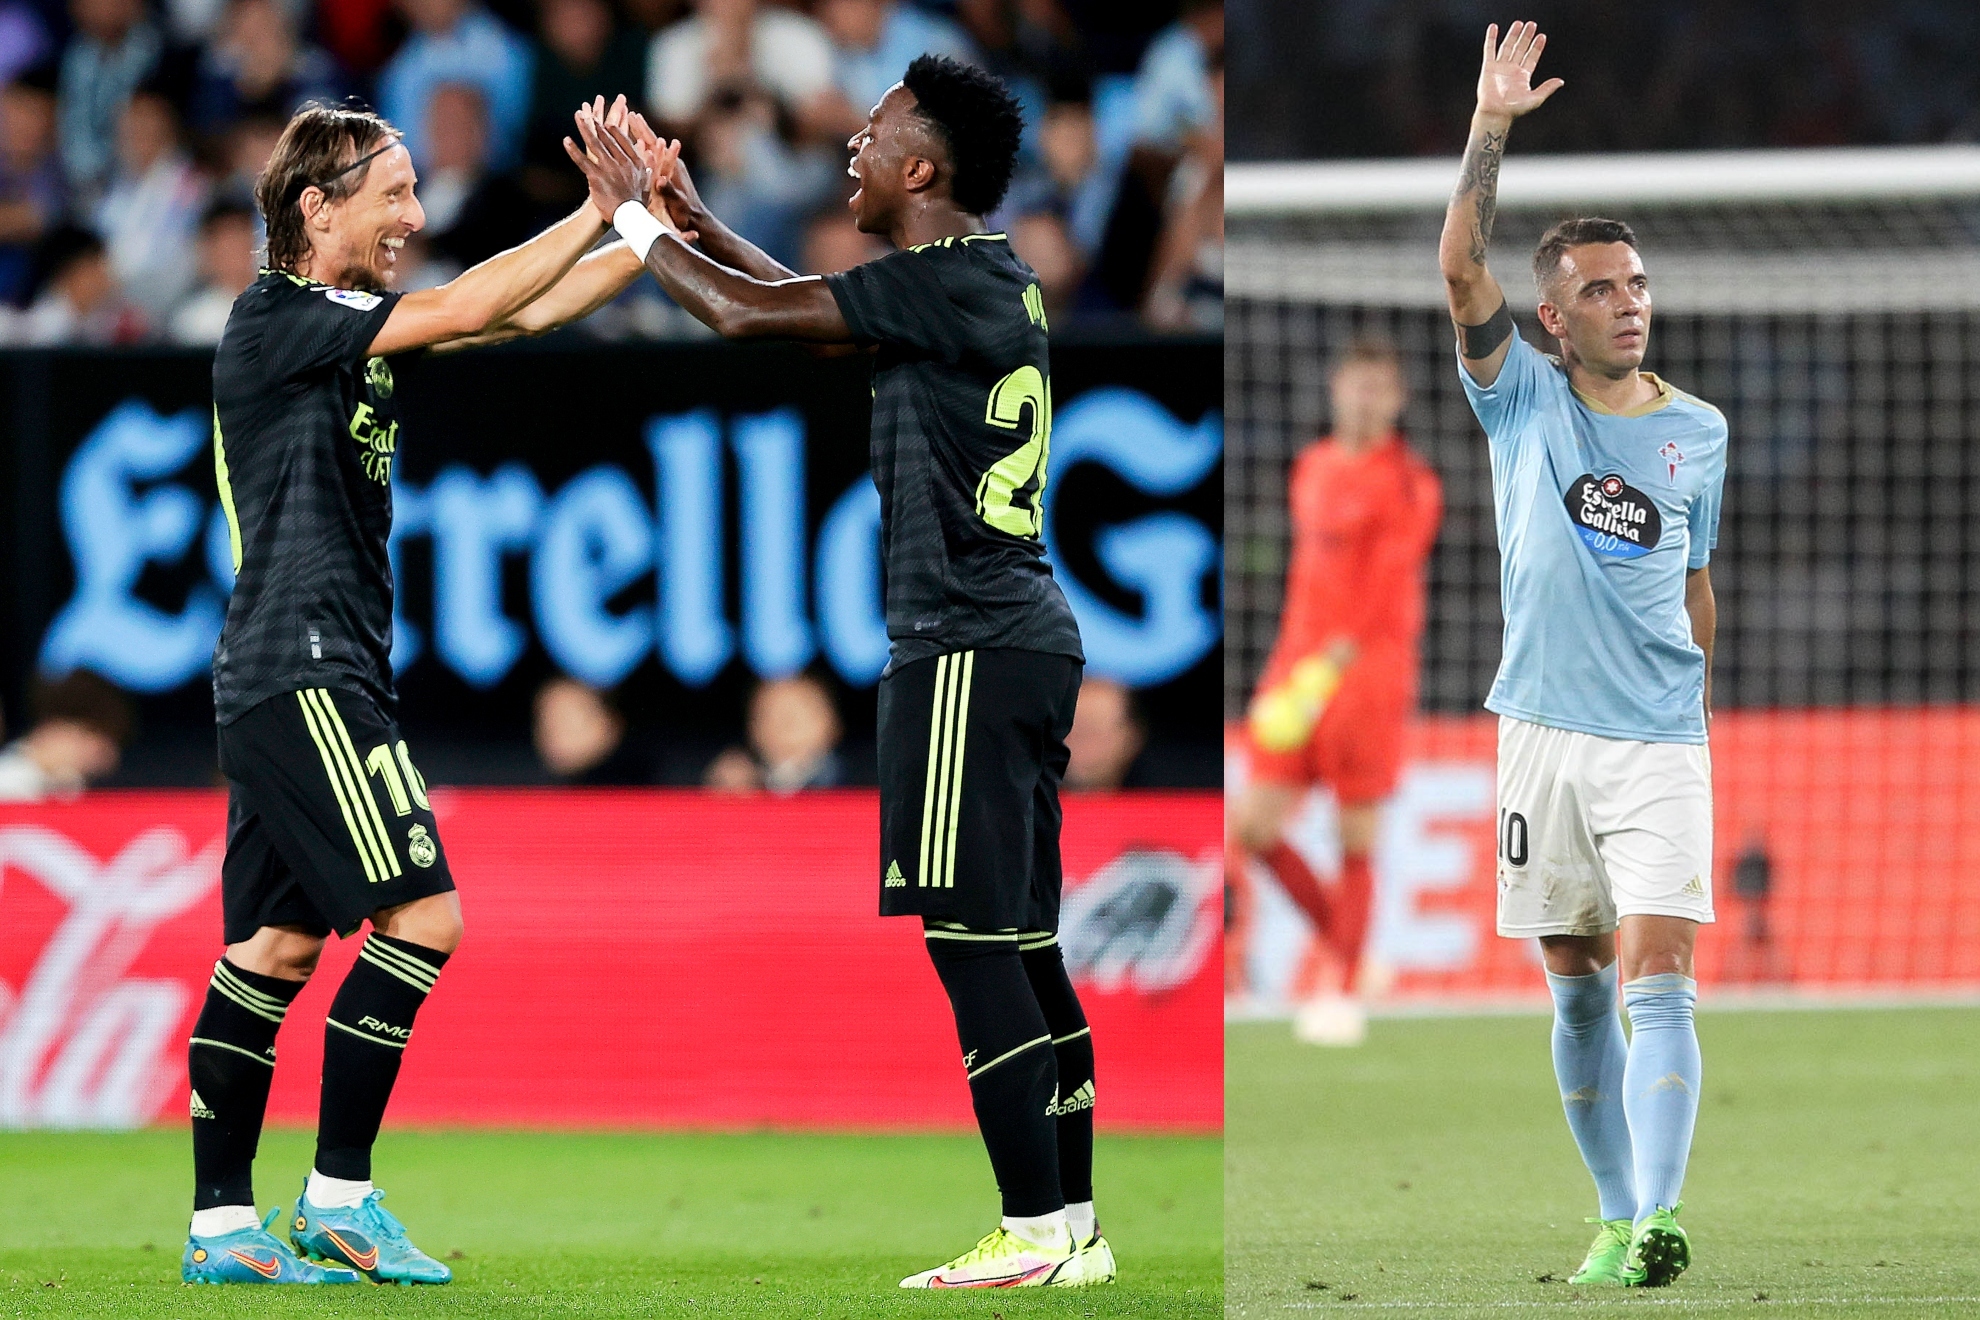 The goalscorers of the Celta-Real Madrid match.